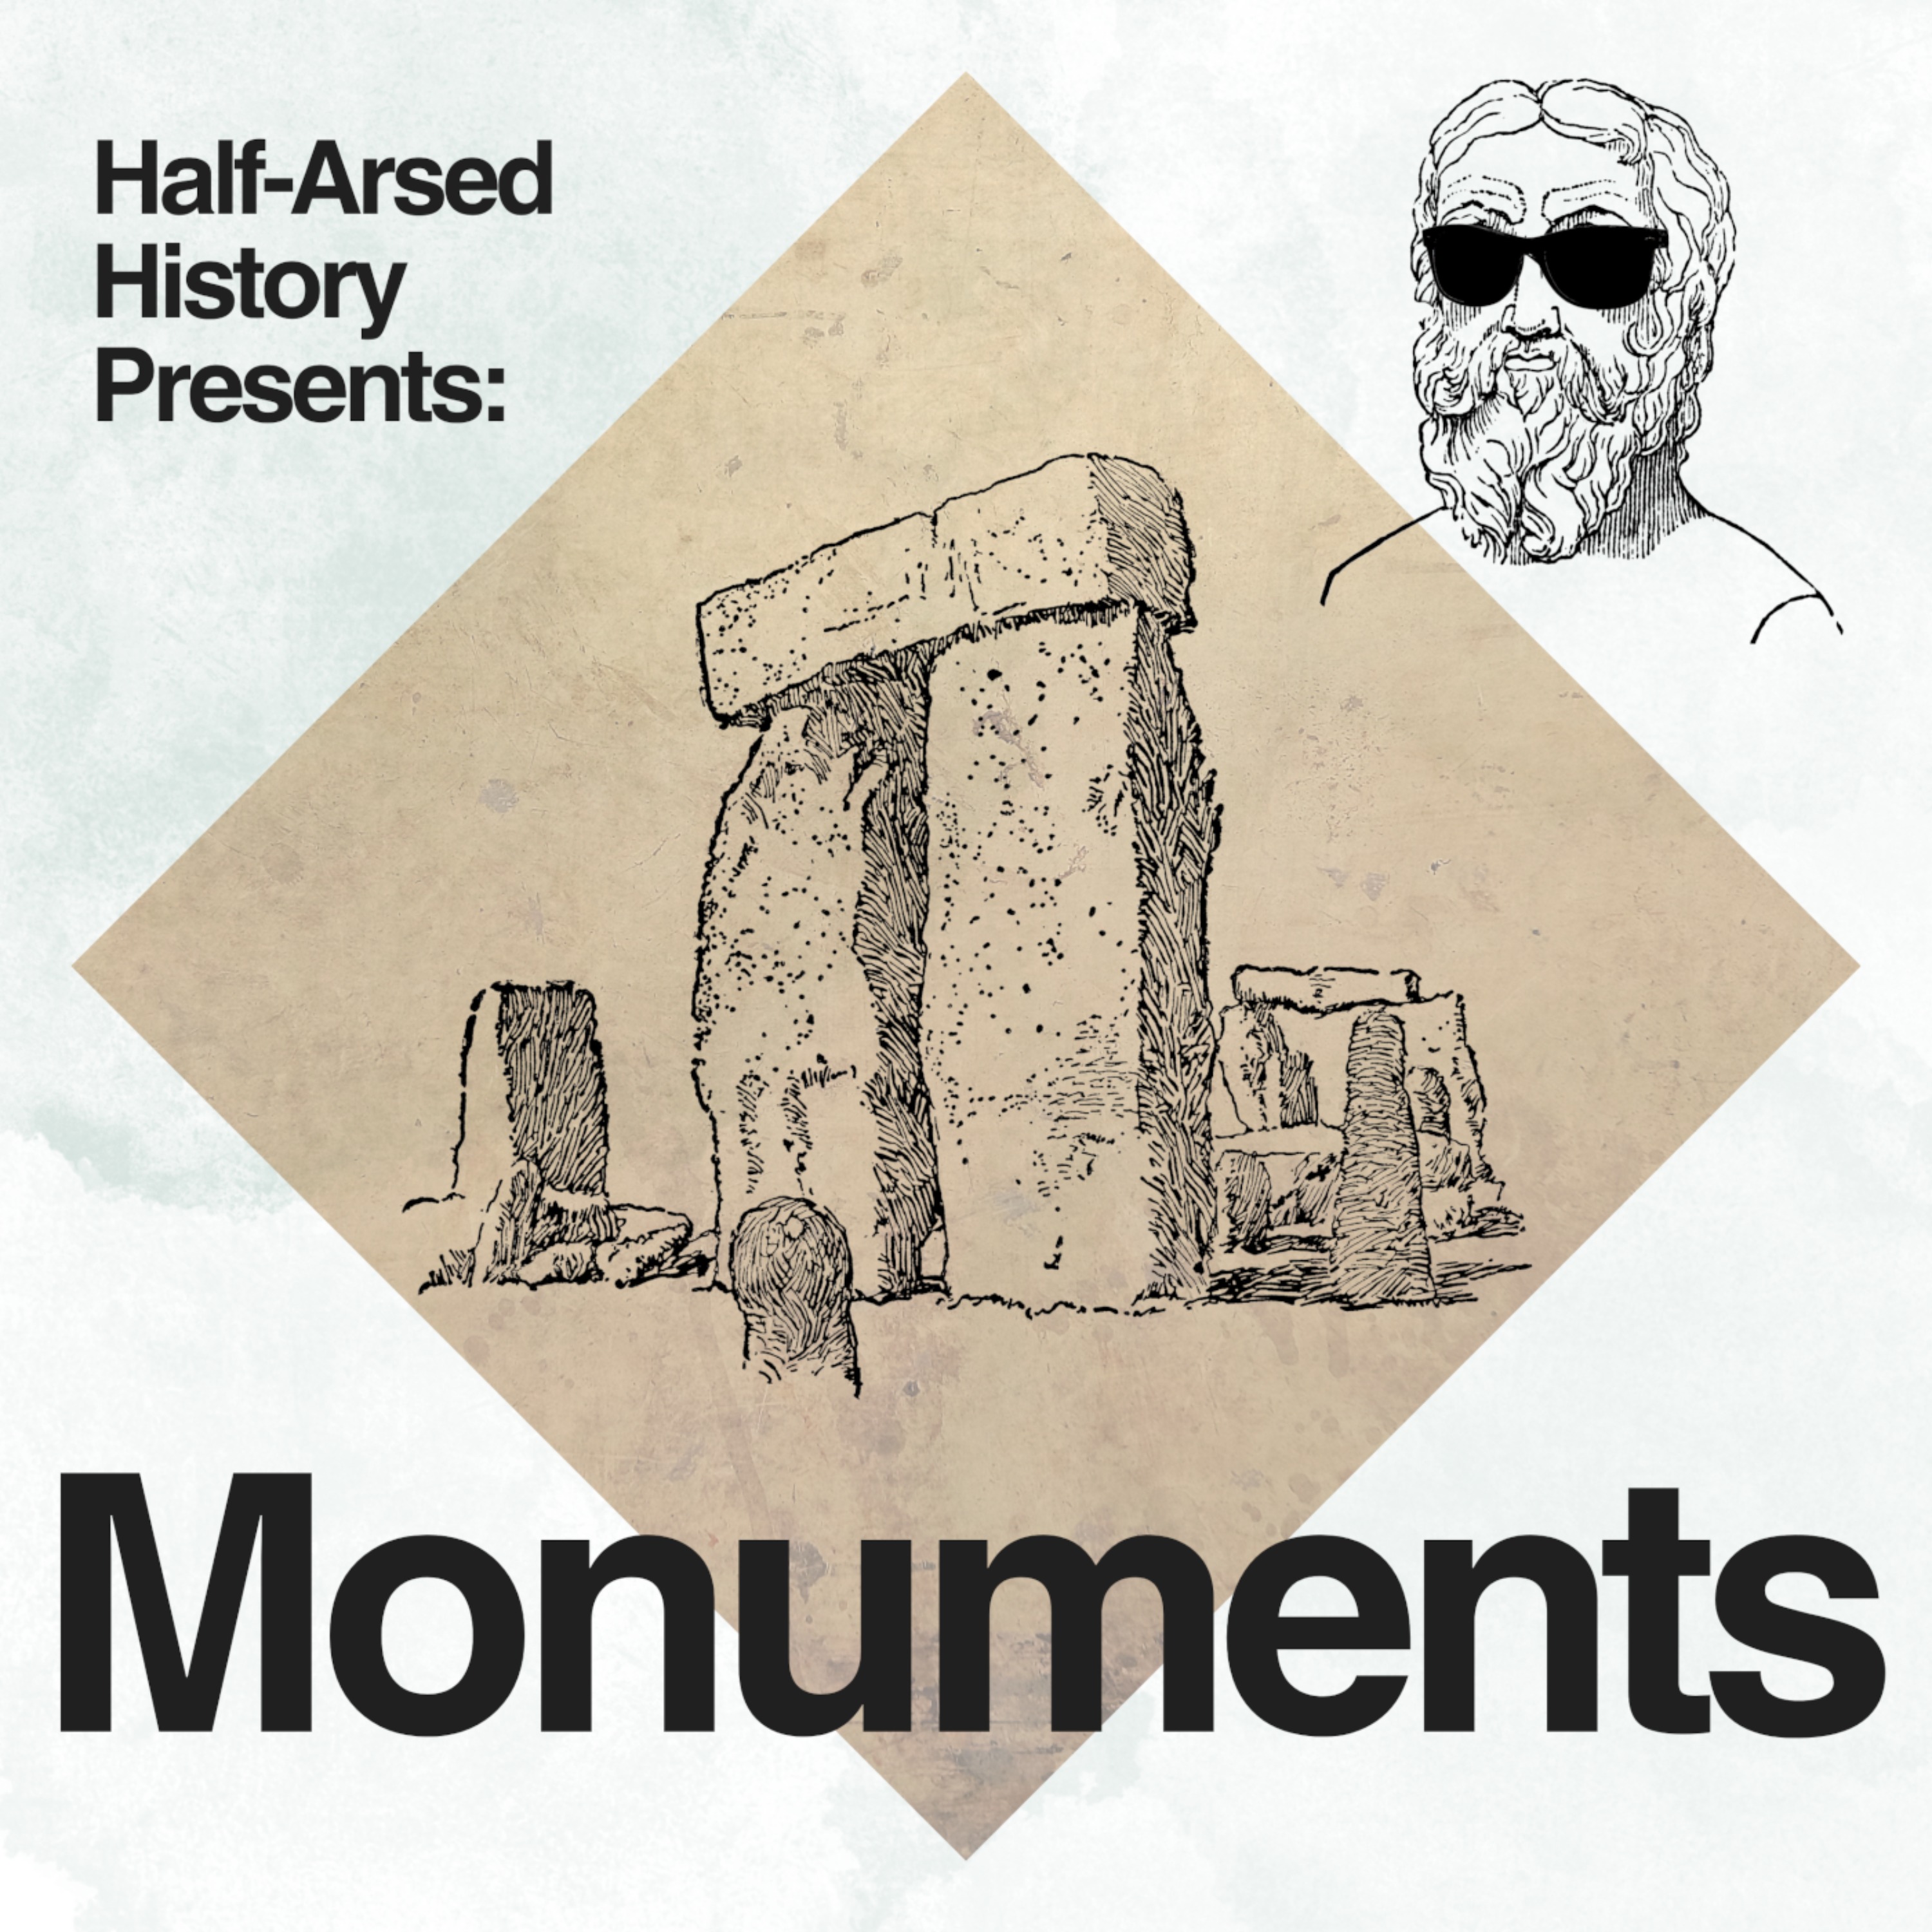 Monuments Episode 16: The Tower of London